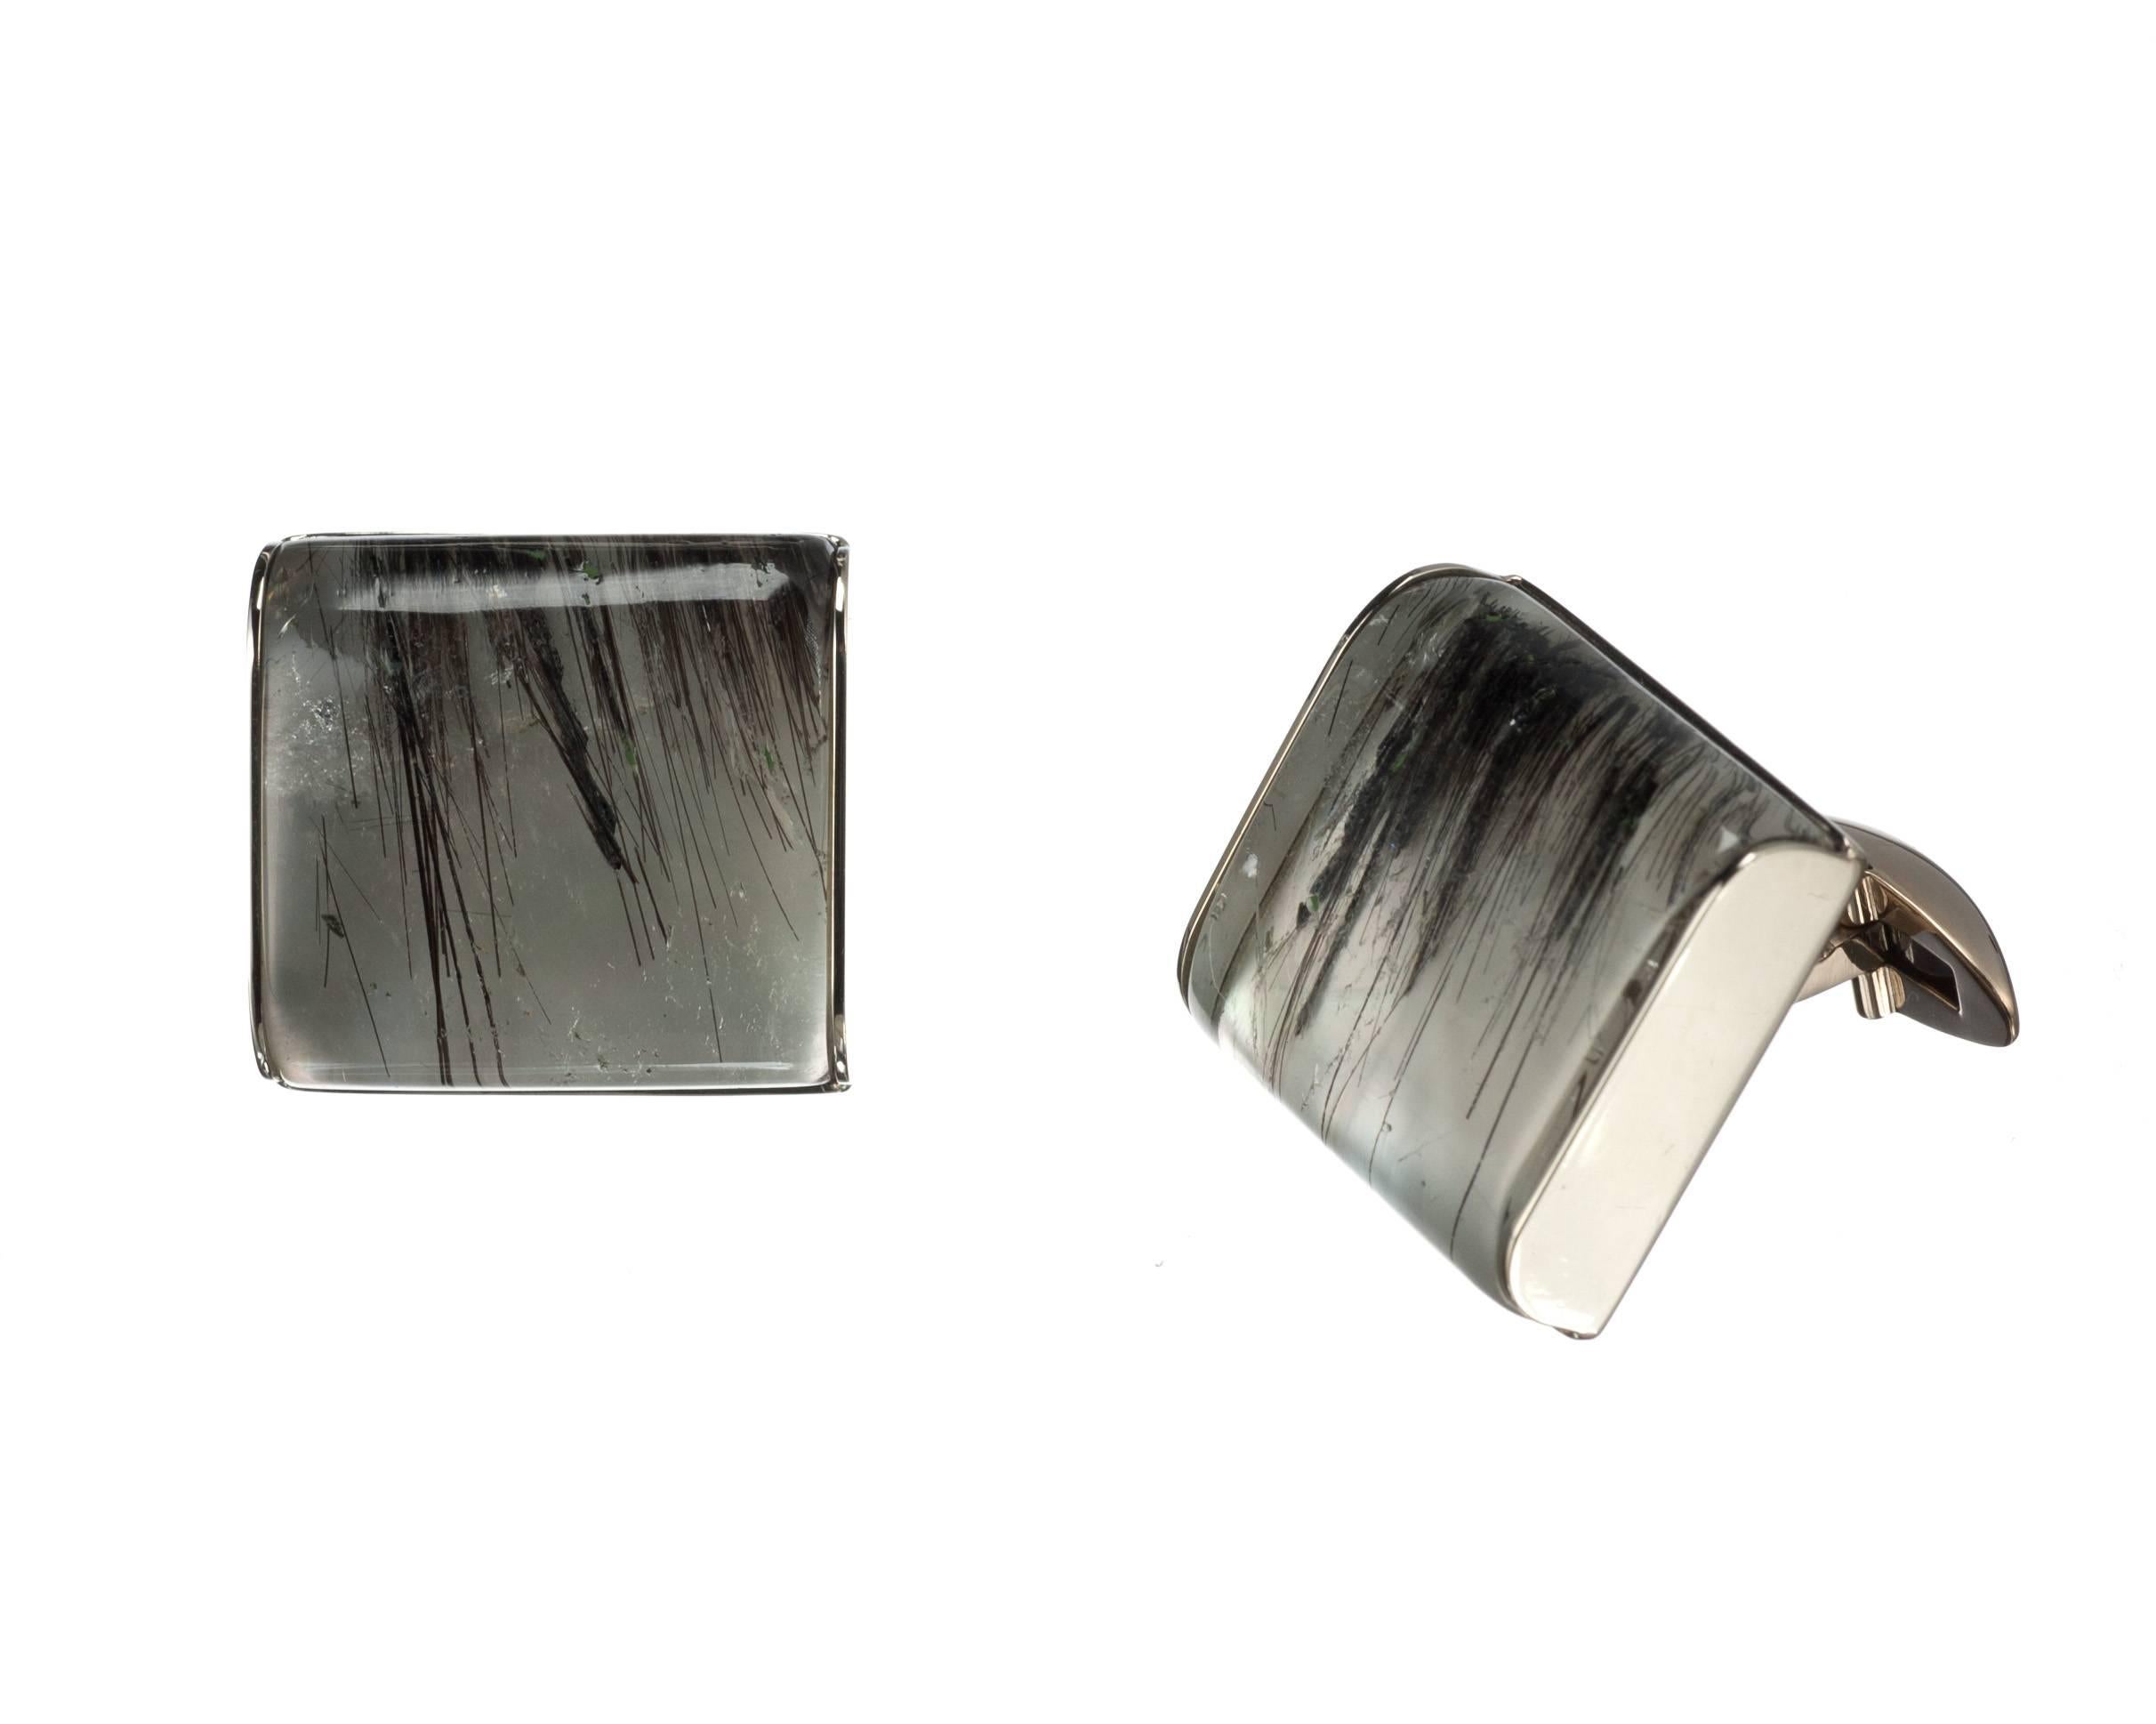 Created by Elleard Heffern Fine Jewelers, a pair of 18-karat white gold cufflinks is set with rectangular tourmalinated quartz and mother-of-pearl doublets, approx. 58.37ctw. Each cufflink measures approx. 0.75” square.